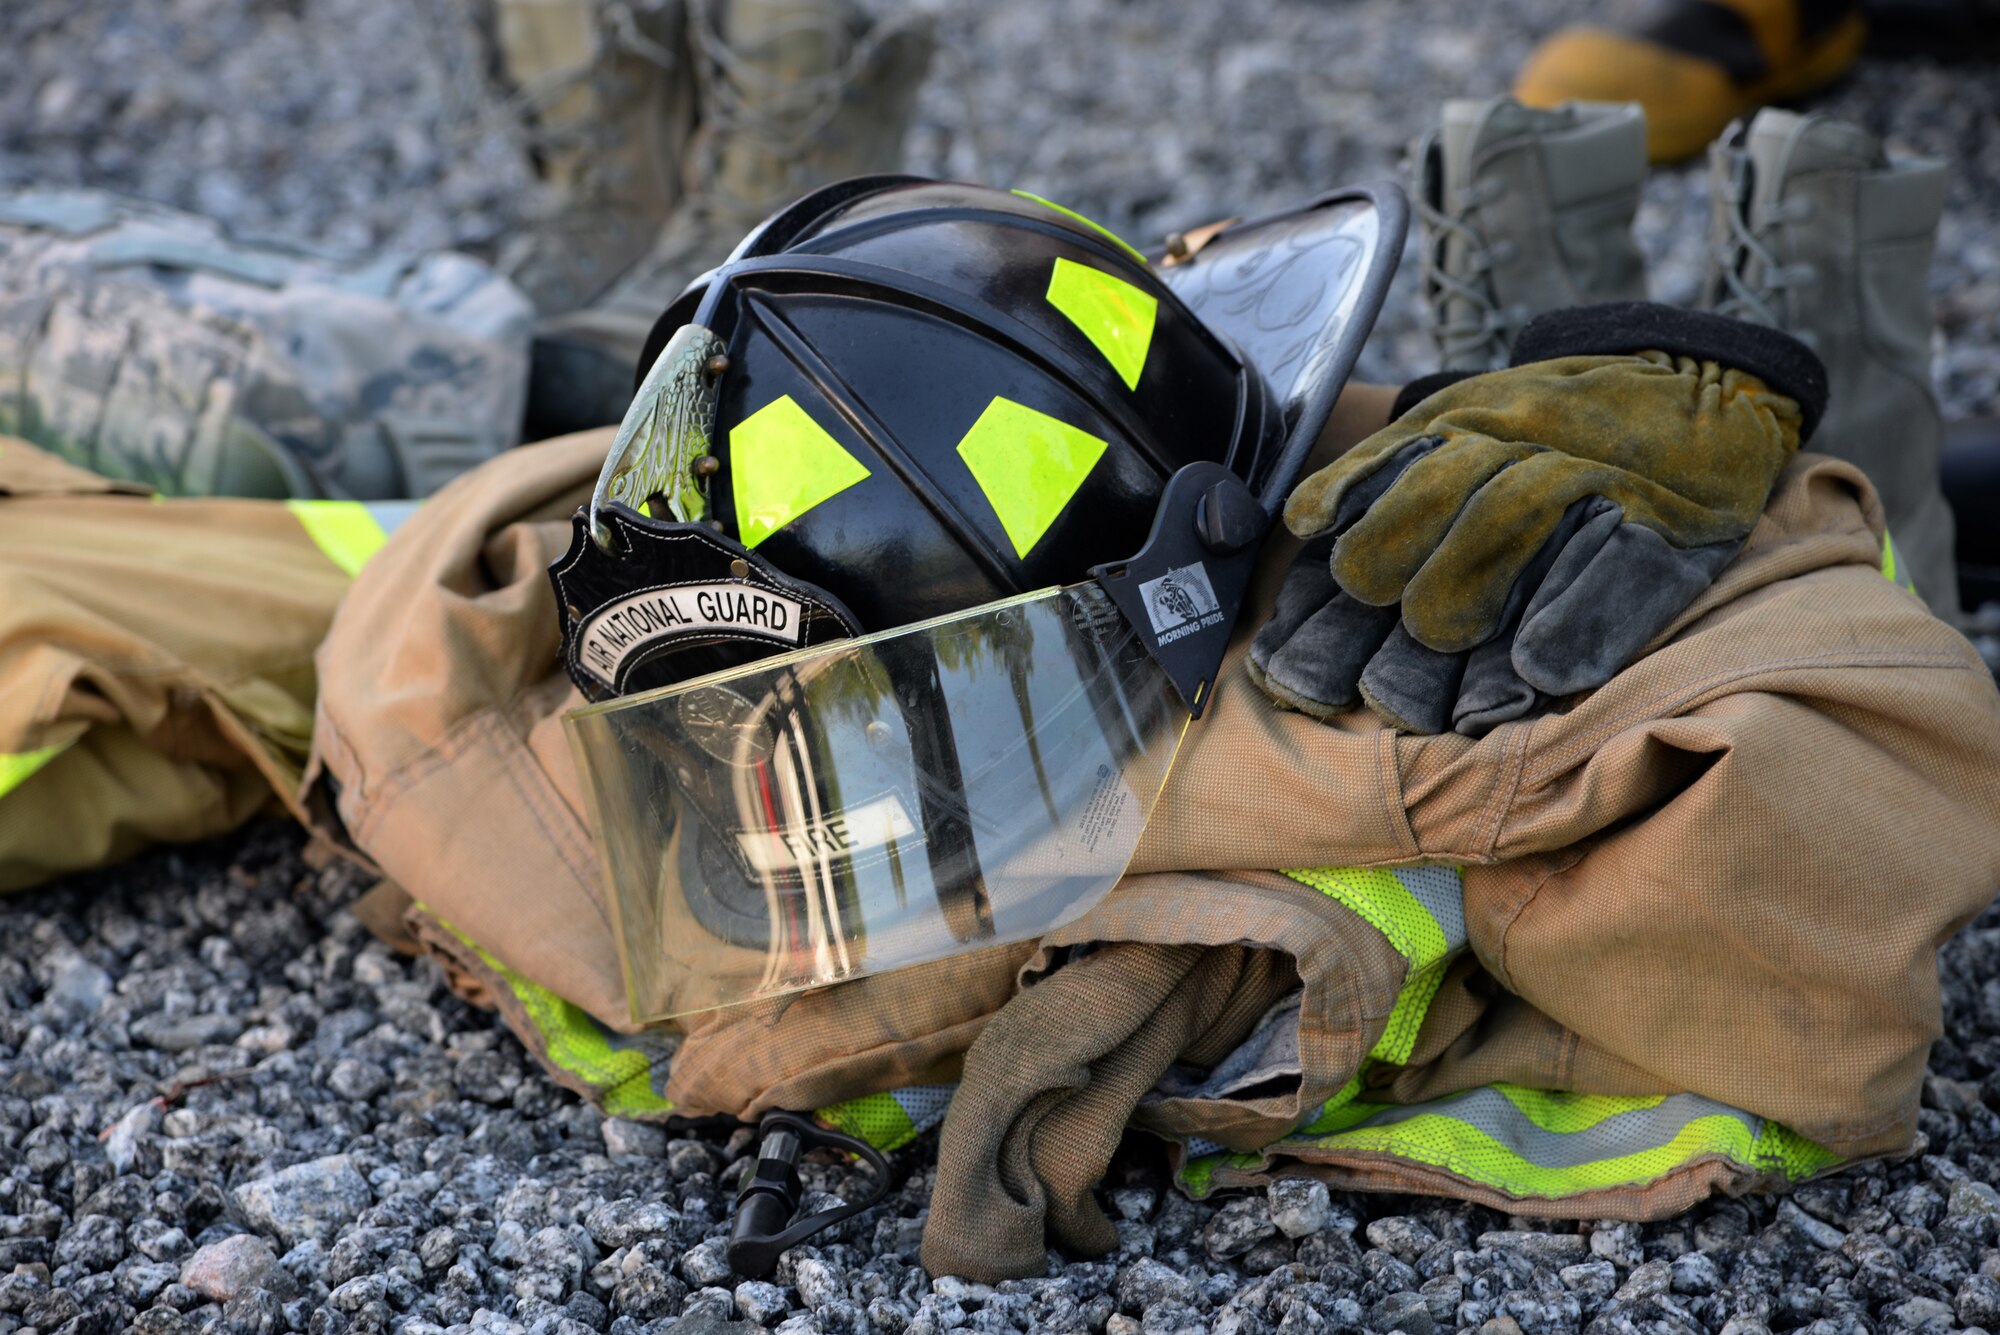 A picture of Firefighter equipment.